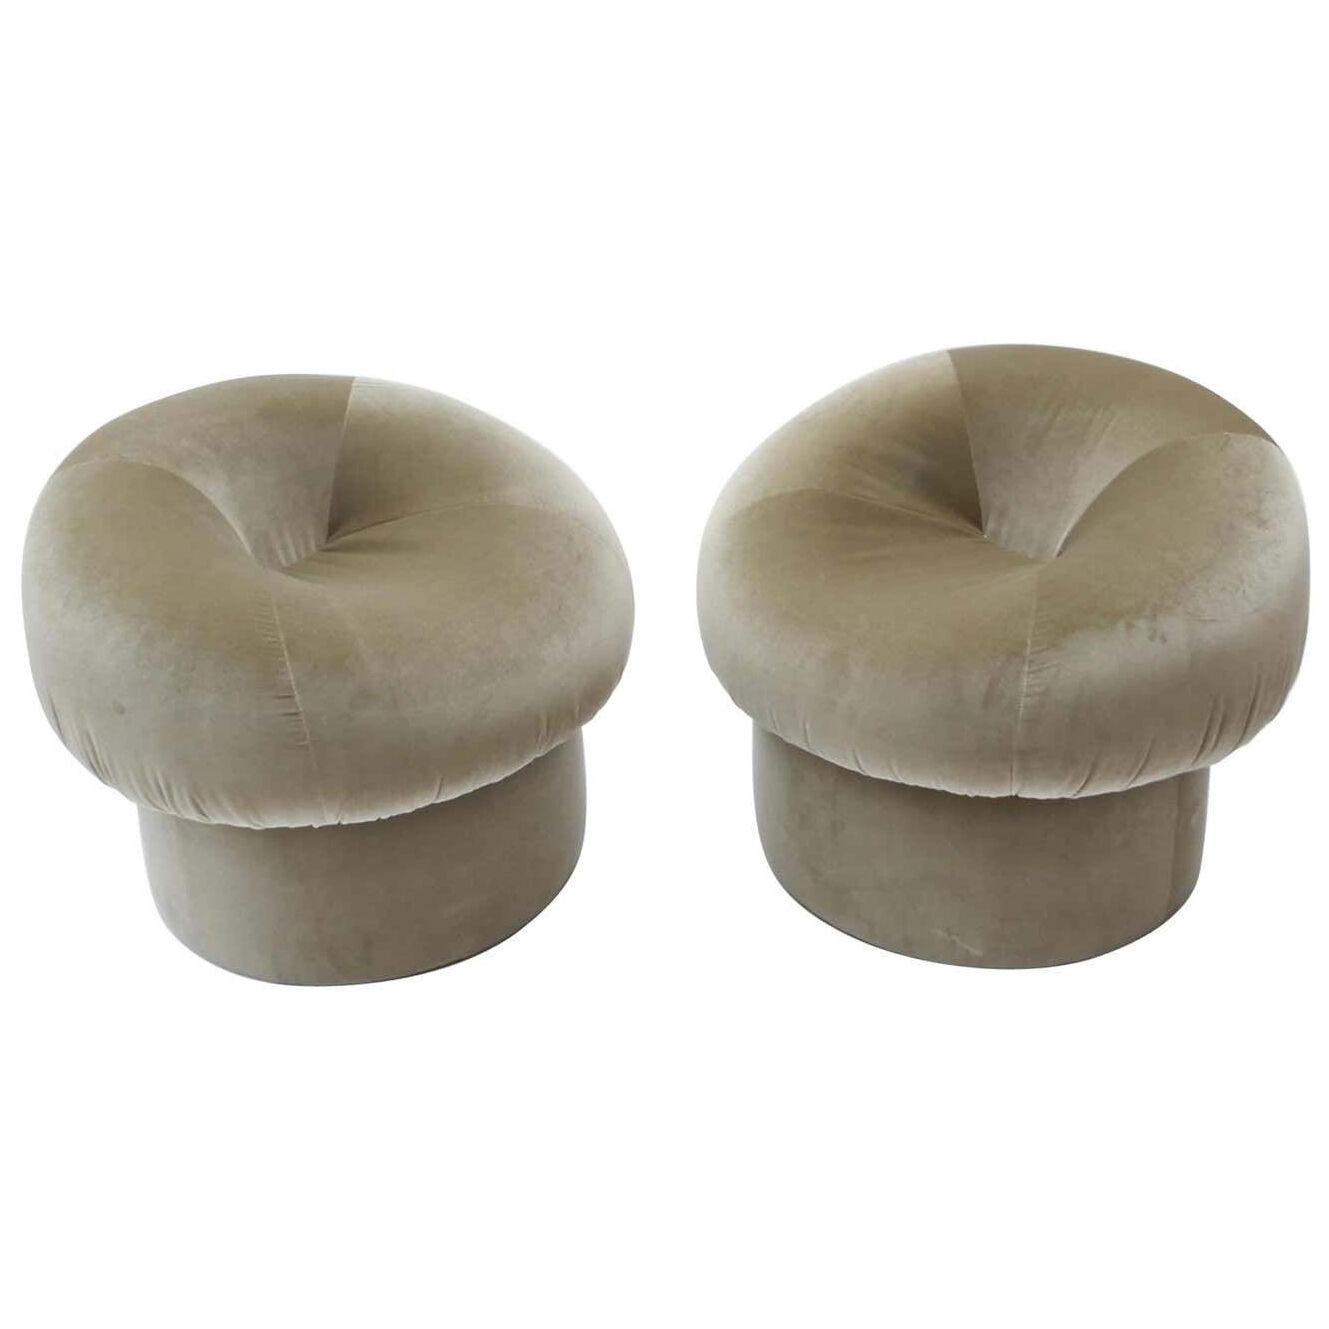 Pair of Mid-Century Modern Style Pouf or Lounge Chairs with Grey Fabric